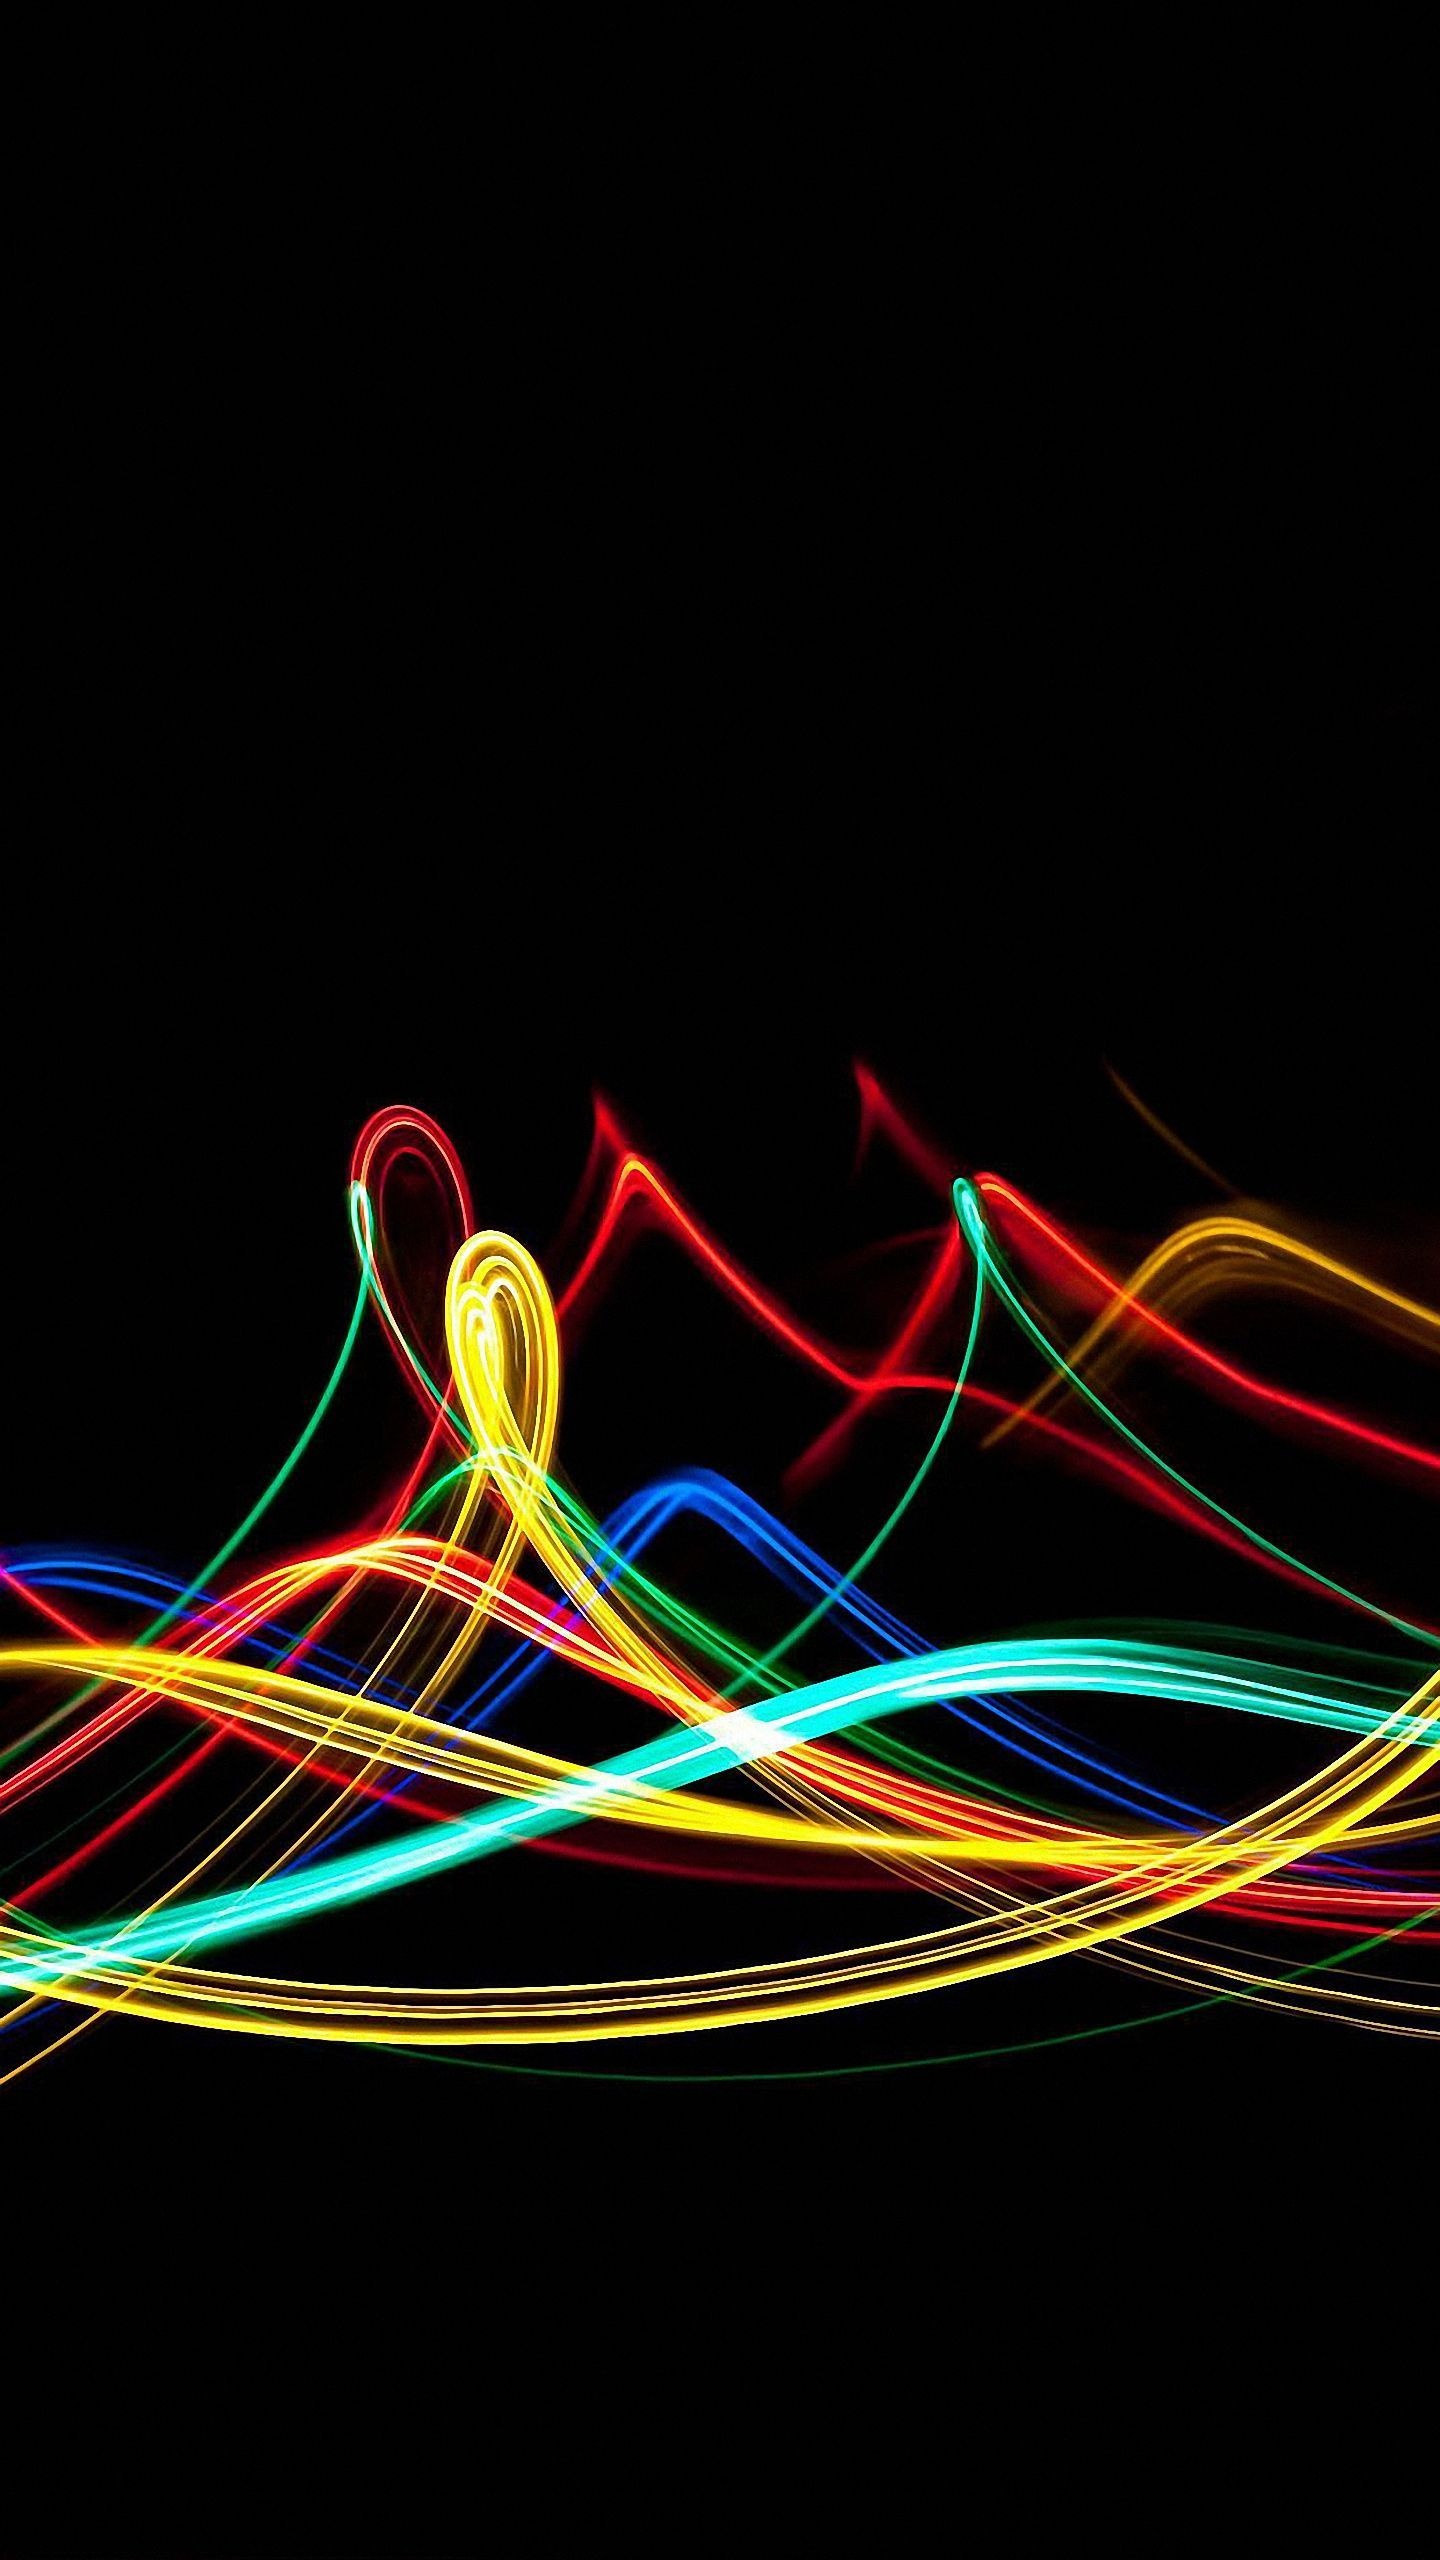 Neon mobile phone wallpaper, Eye-catching design, Unique smartphone backgrounds, Vibrant and colorful, 1440x2560 HD Handy